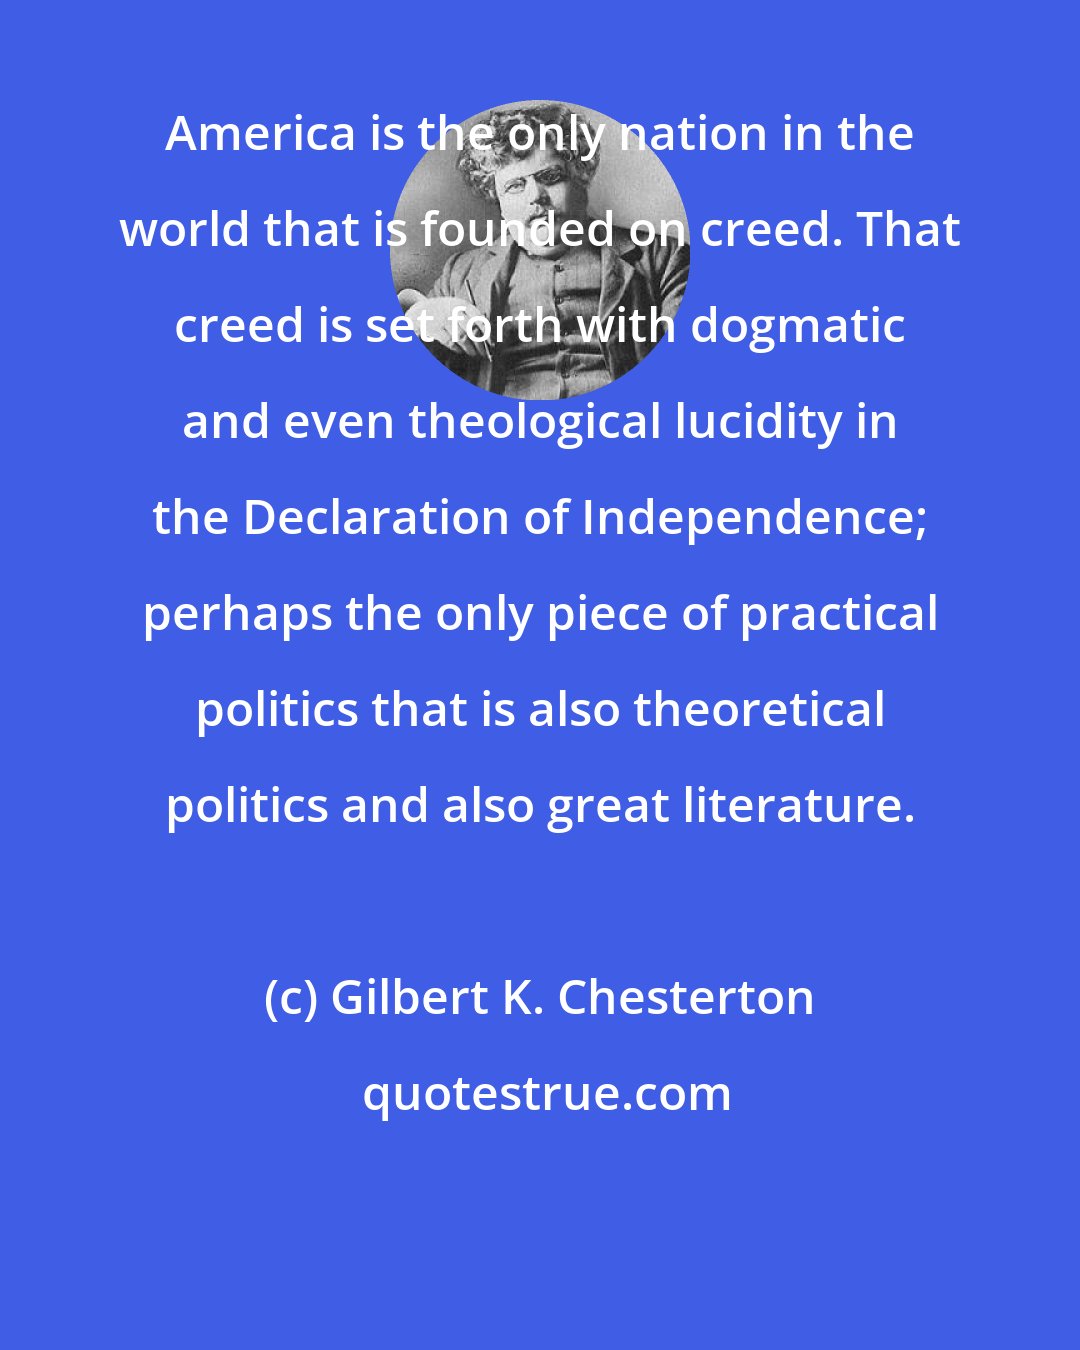 Gilbert K. Chesterton: America is the only nation in the world that is founded on creed. That creed is set forth with dogmatic and even theological lucidity in the Declaration of Independence; perhaps the only piece of practical politics that is also theoretical politics and also great literature.